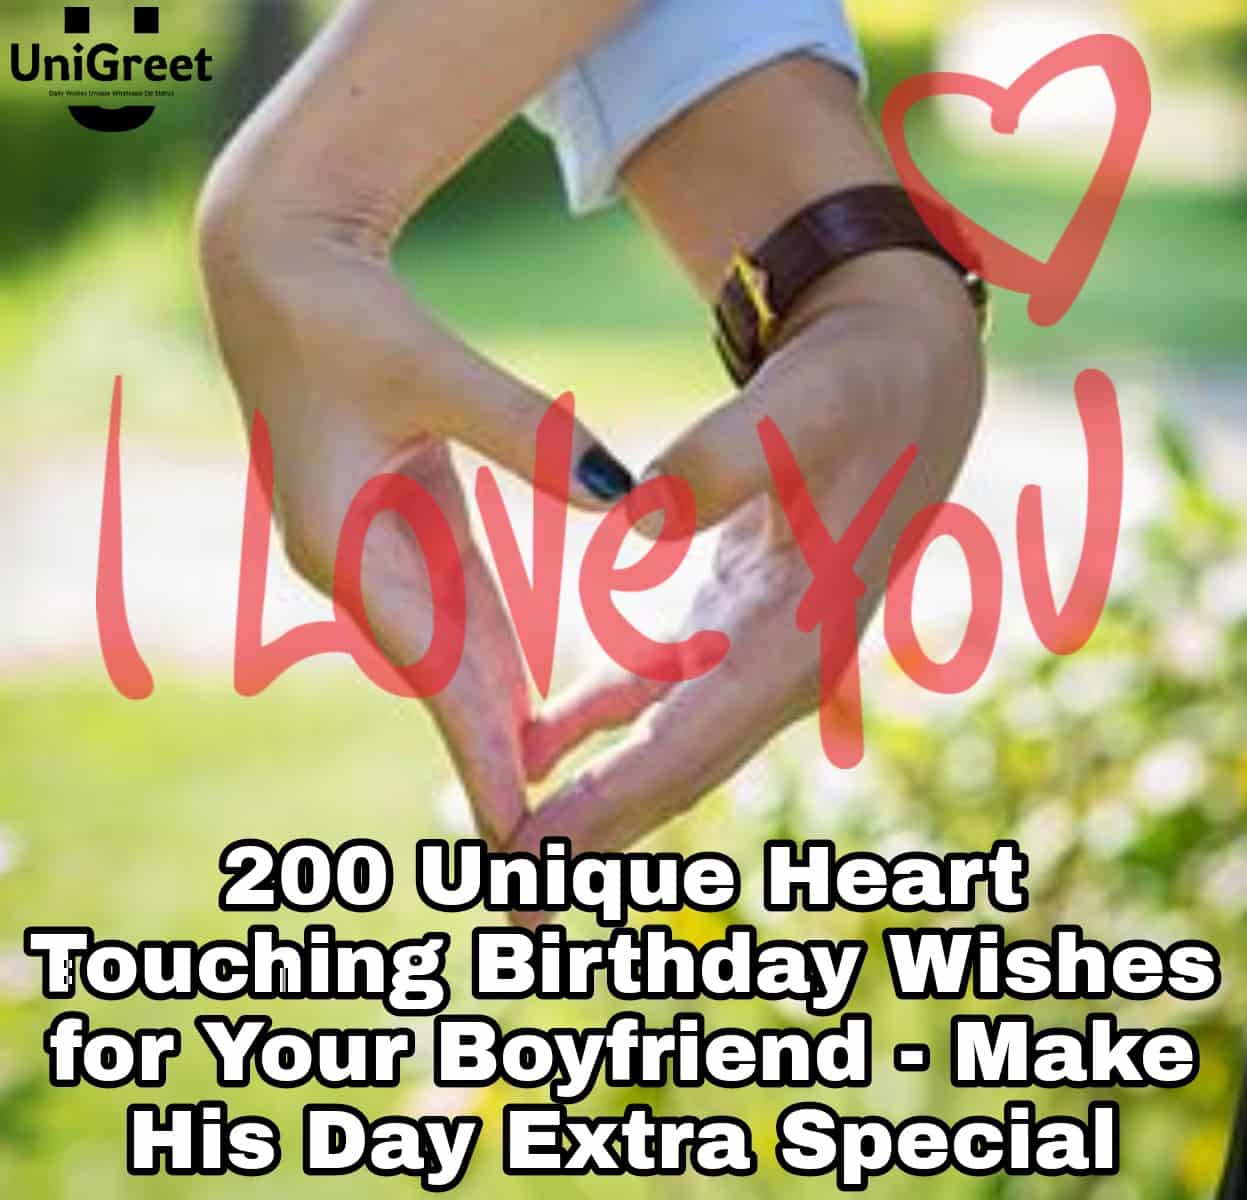 Heart Touching Birthday Wishes for Your Boyfriend